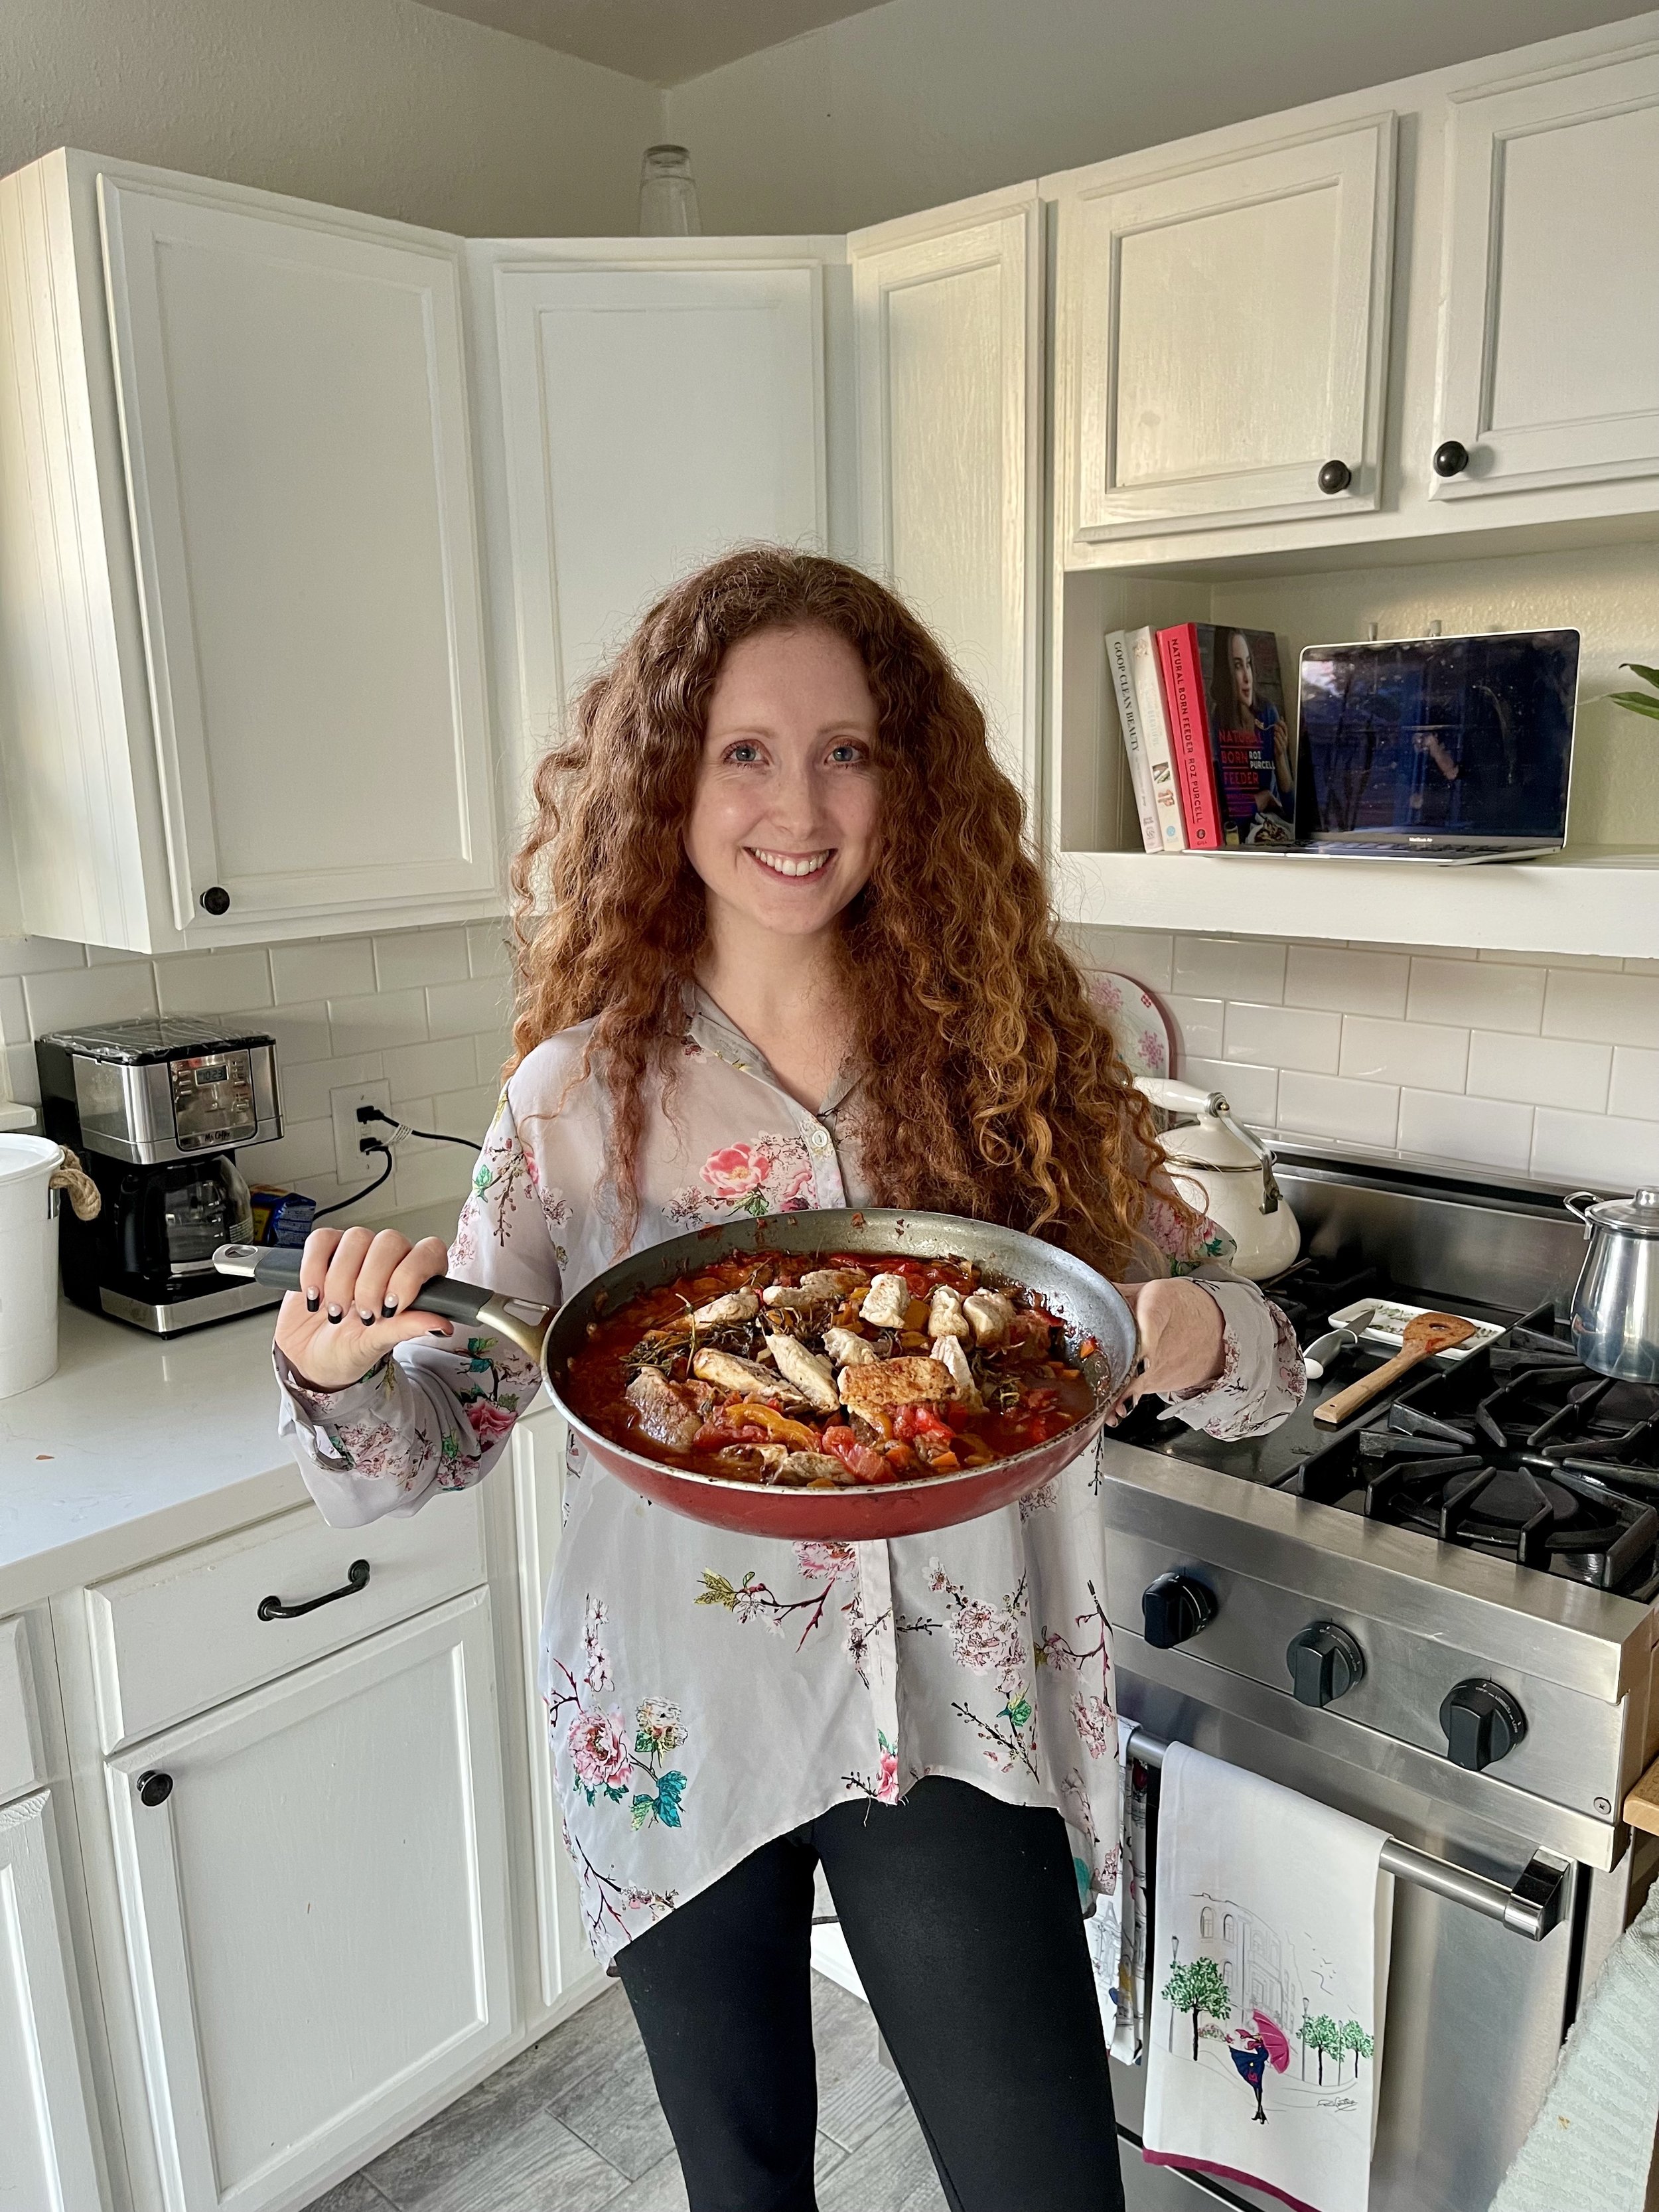 I did a chef virtual cooking class with Kitchen on Fire Berkeley and it was amazing. Find out all the details in my Kitchen on Fire reviews. I had been looking up East bay cooking classes / Bay Area cooking classes and saw so many amazing Kitchen on